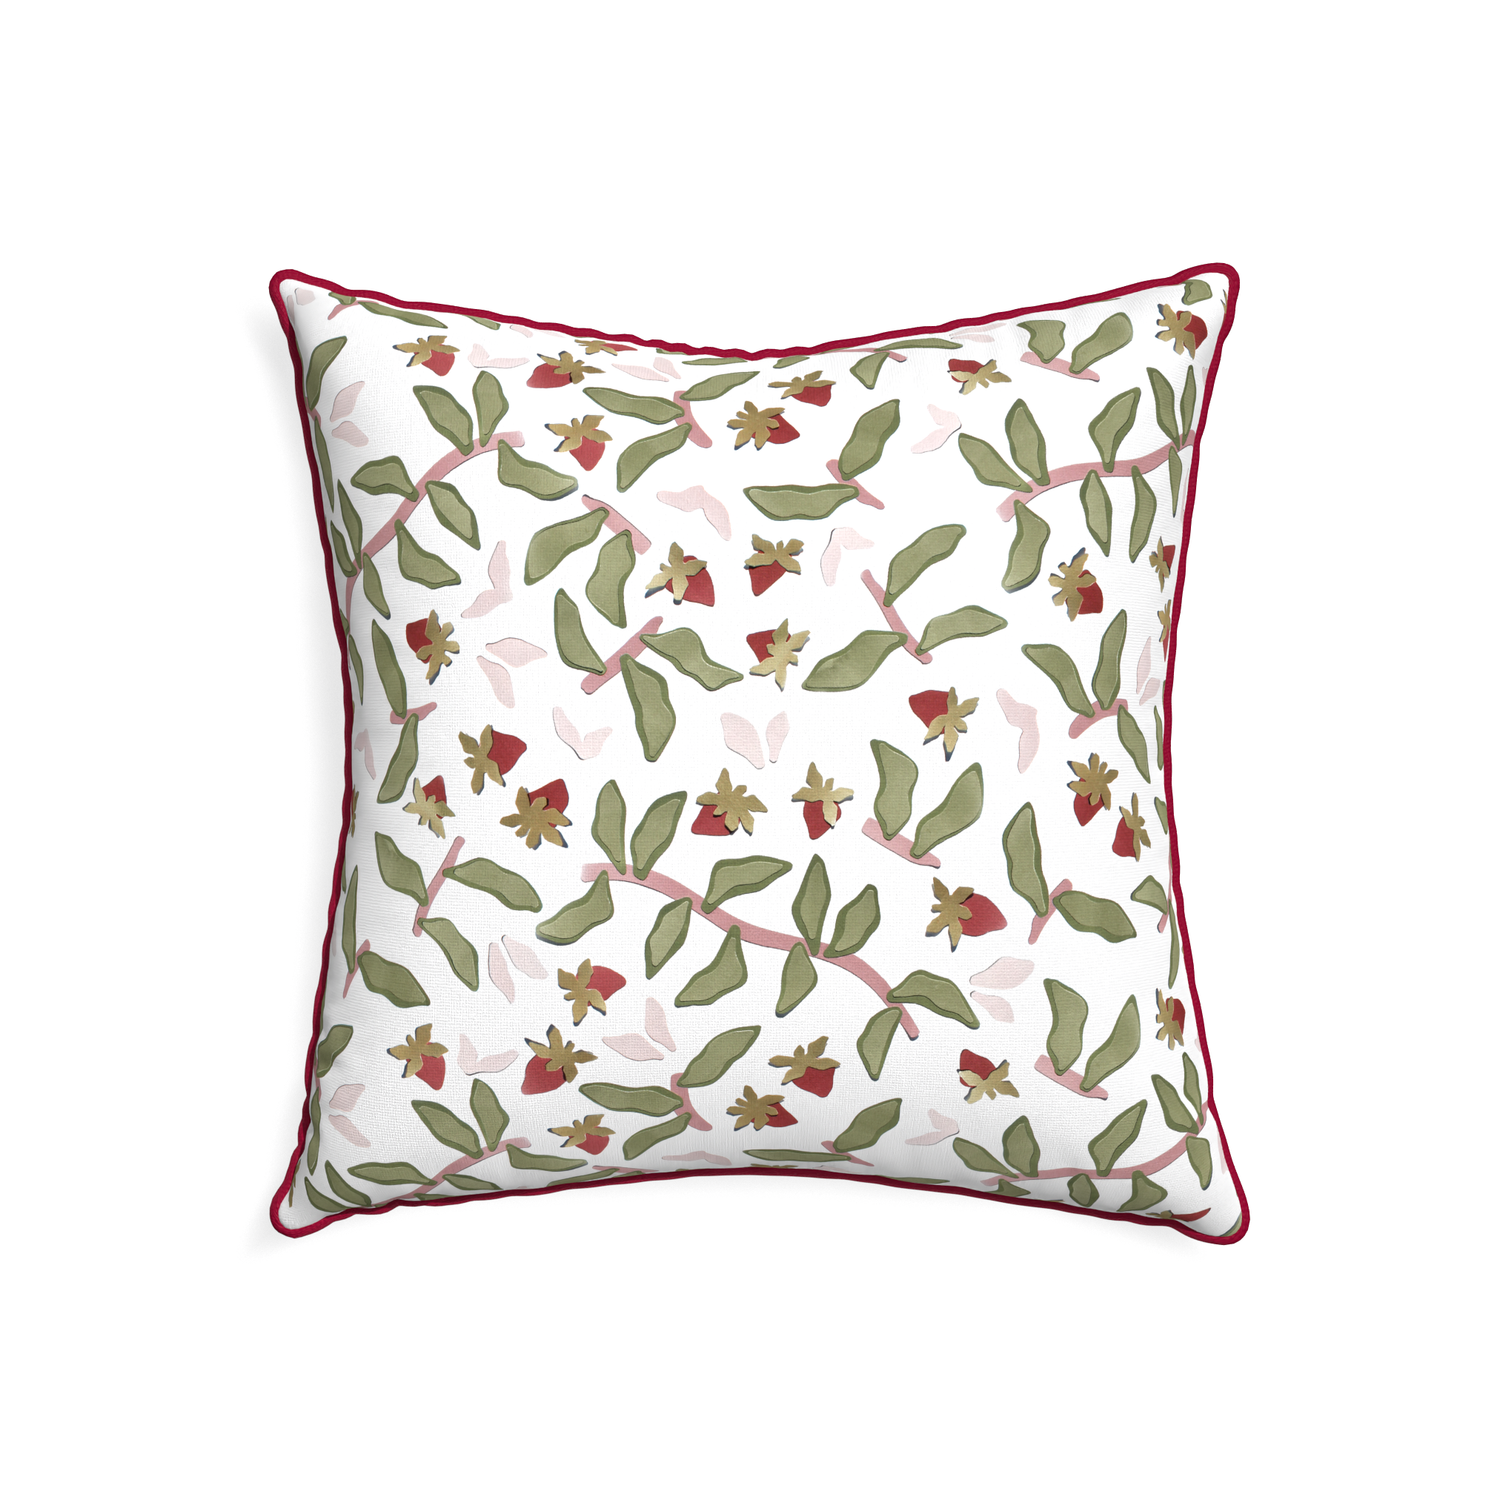 22-square nellie custom pillow with raspberry piping on white background